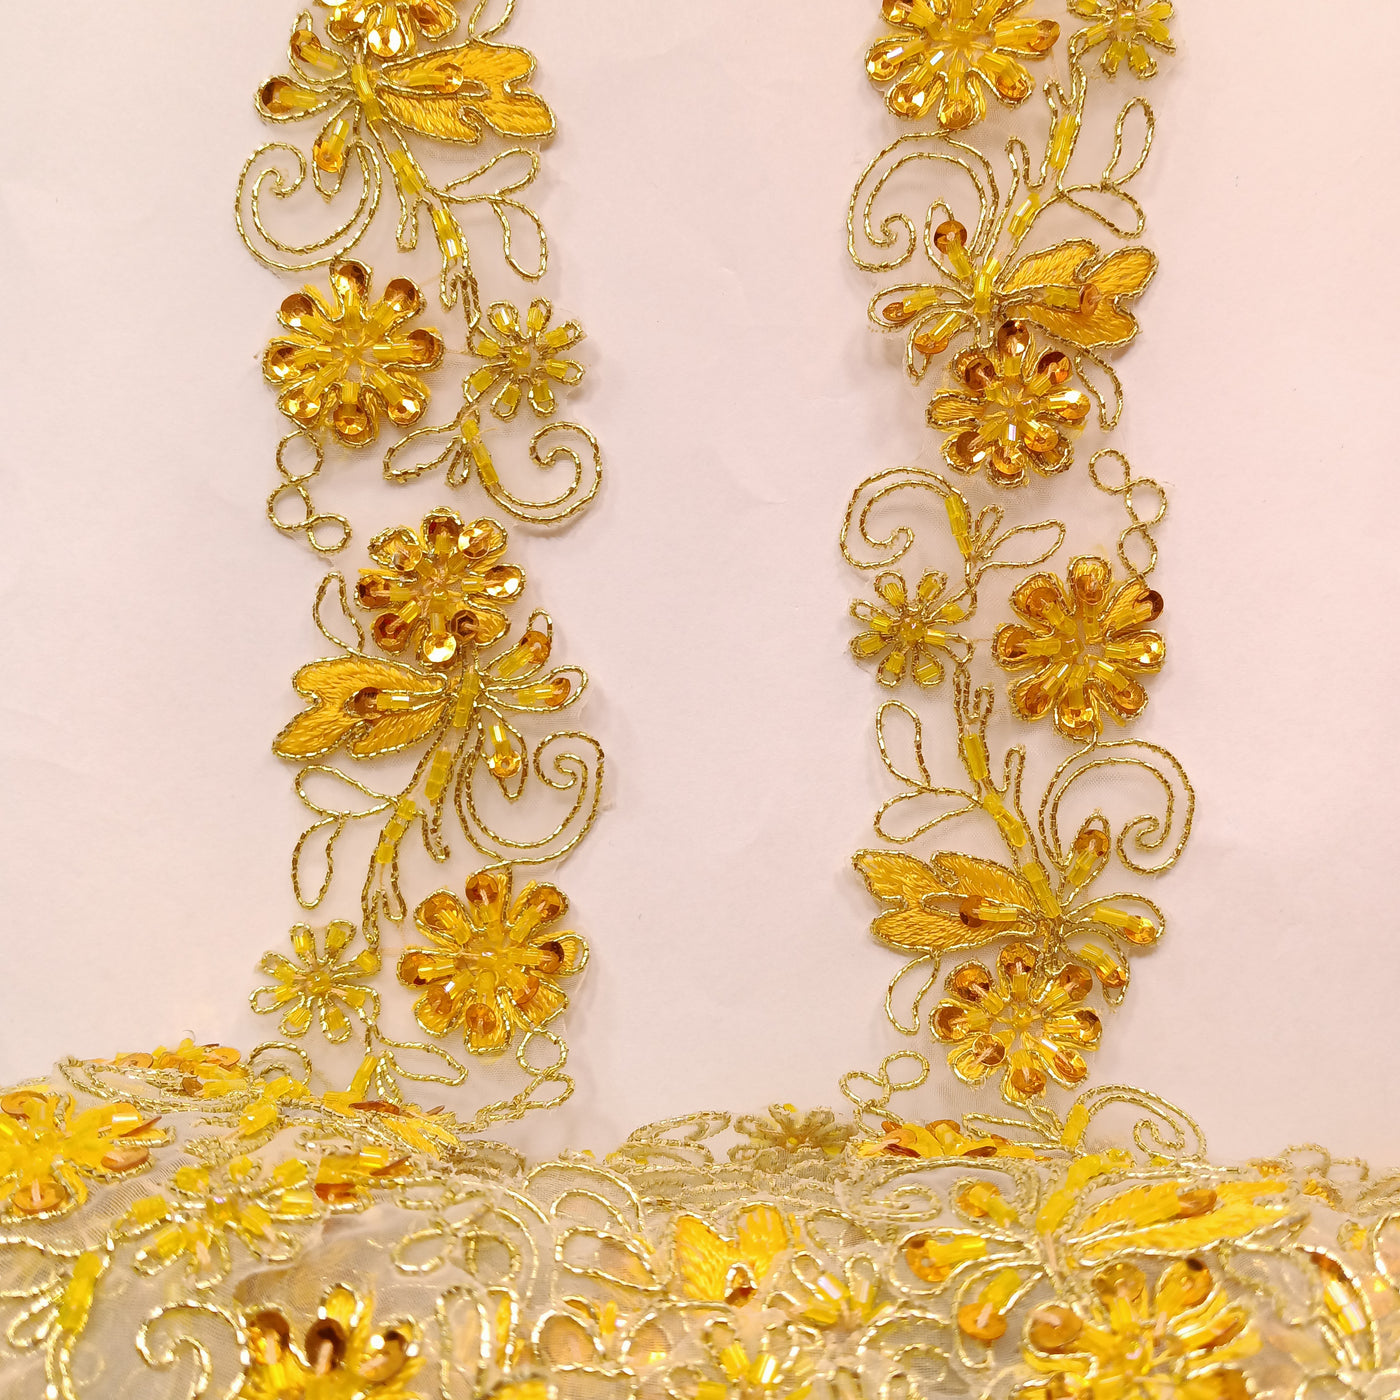 Beaded, Corded & Embroidered on Organza Yellow with Gold Trimming. Lace Usa